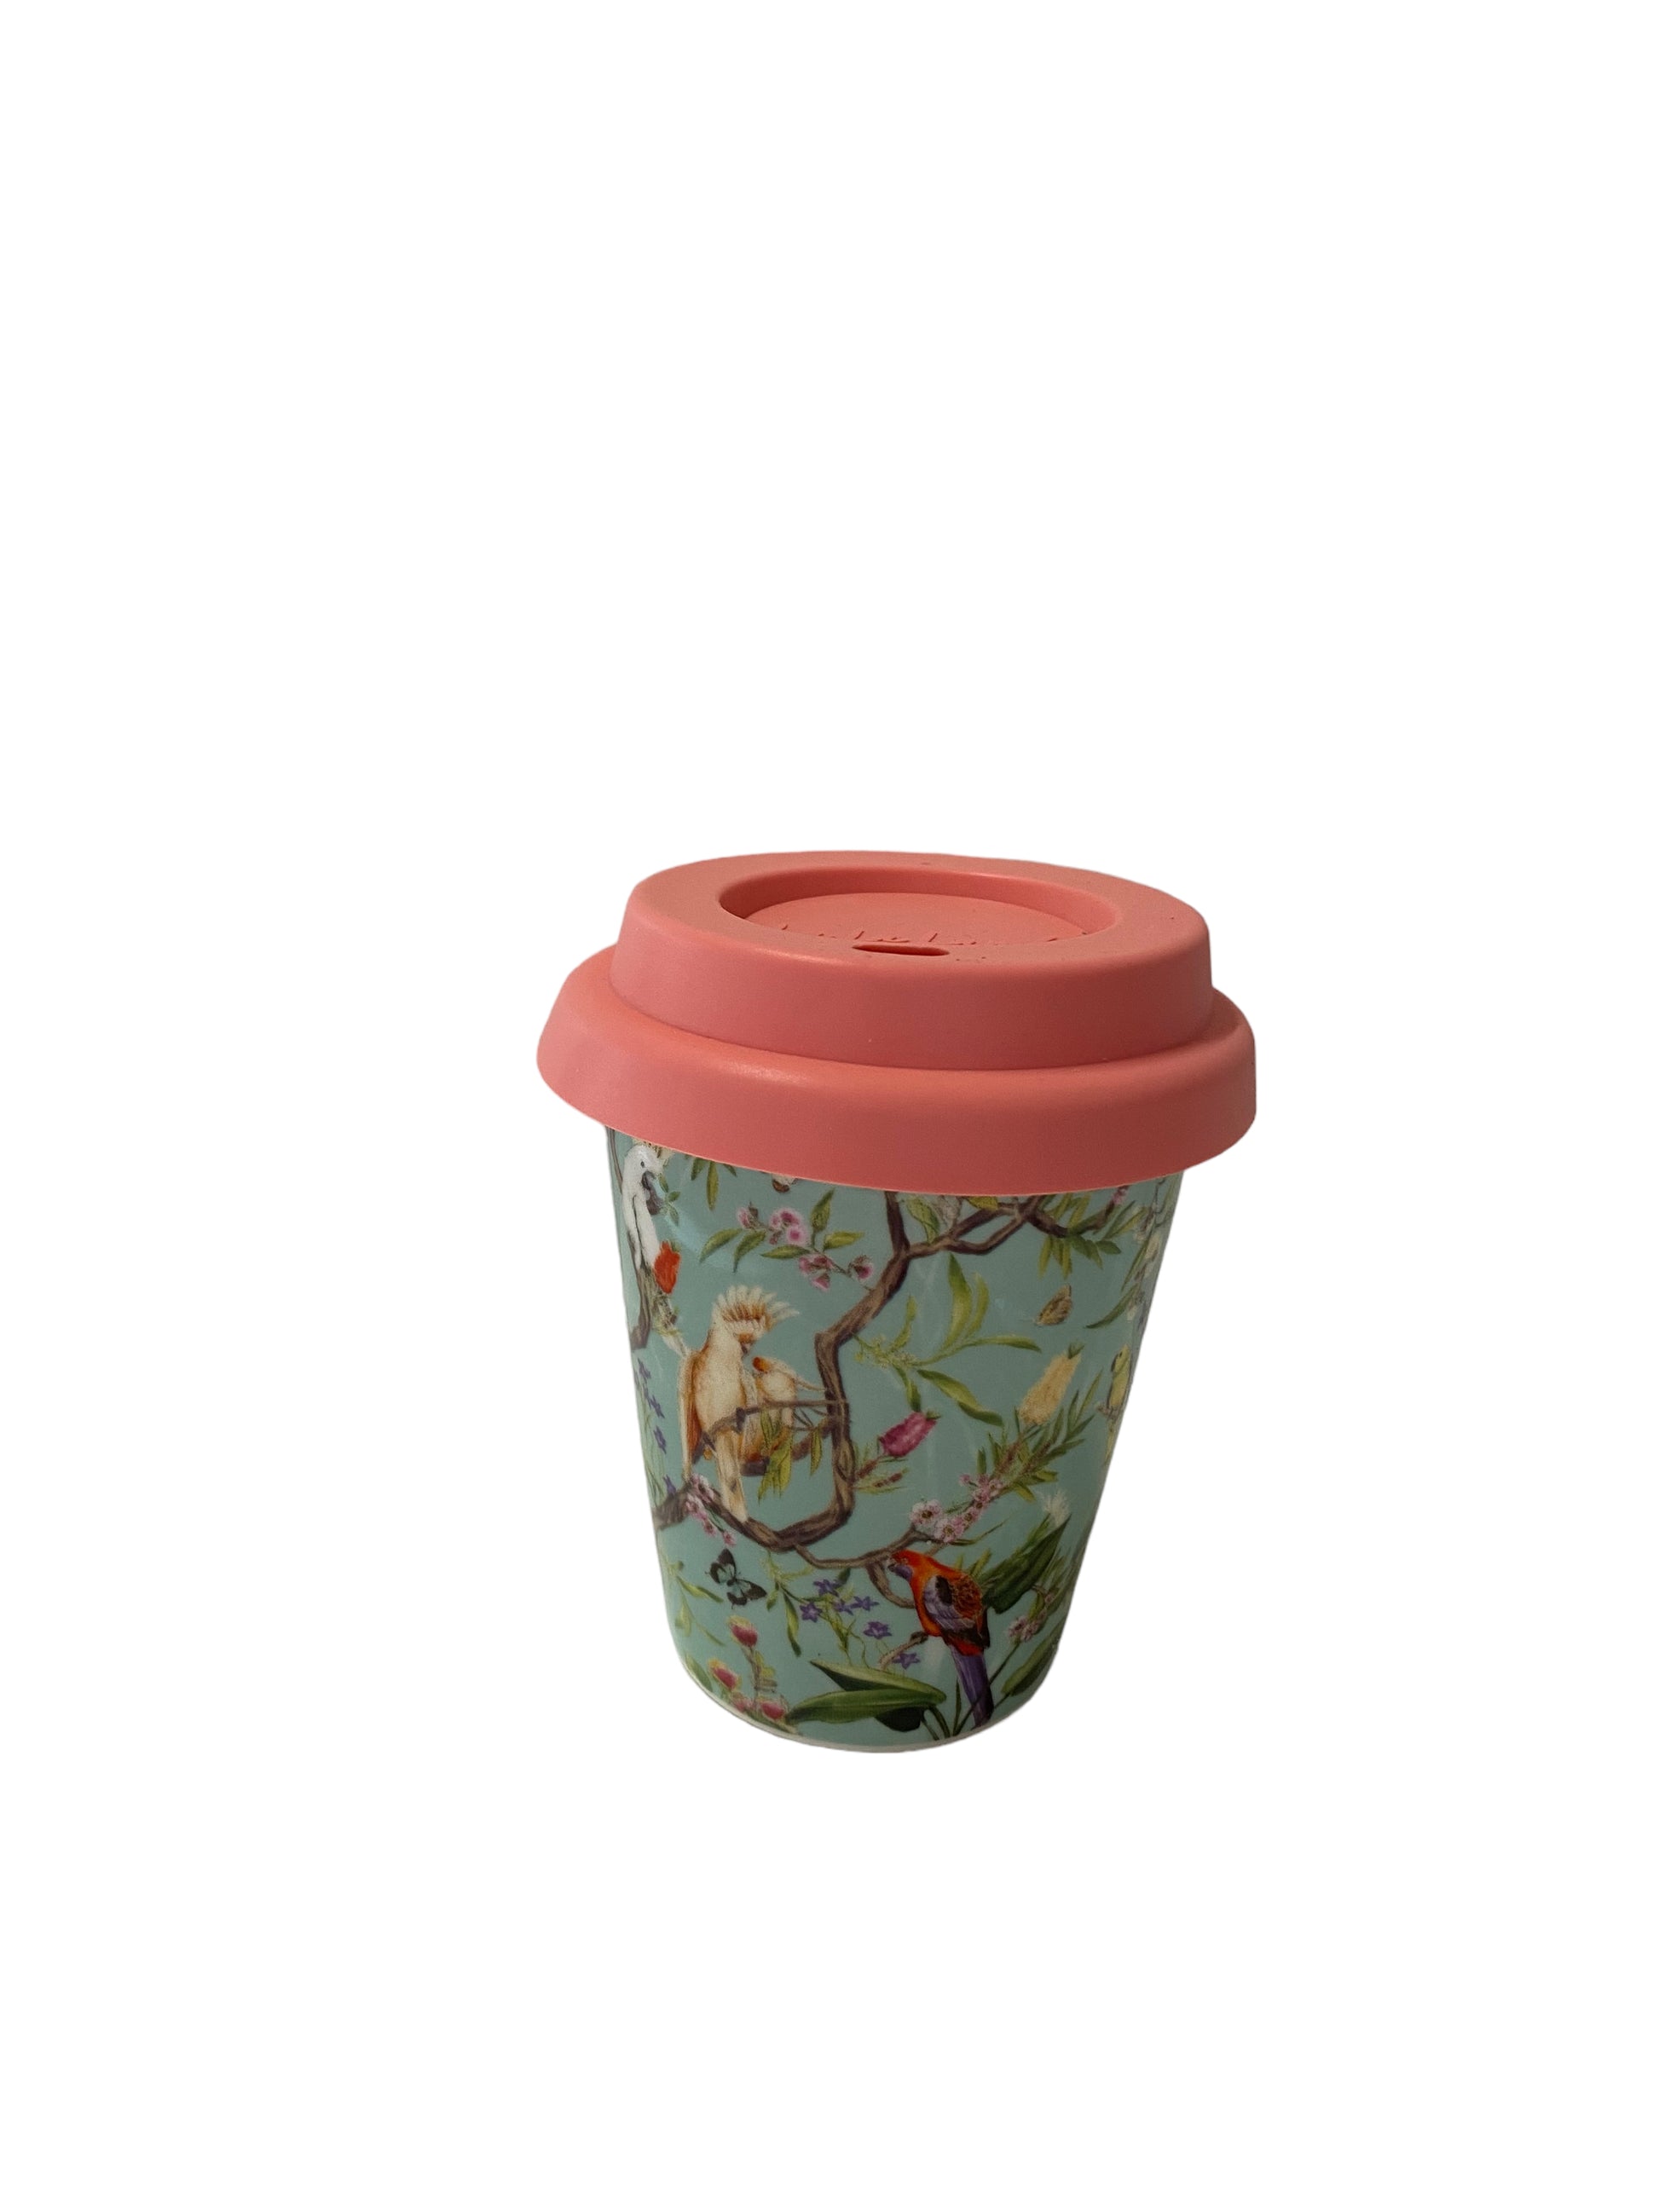 Cup Coffee Mug Parrot Bird - The Renmy Store Homewares & Gifts 